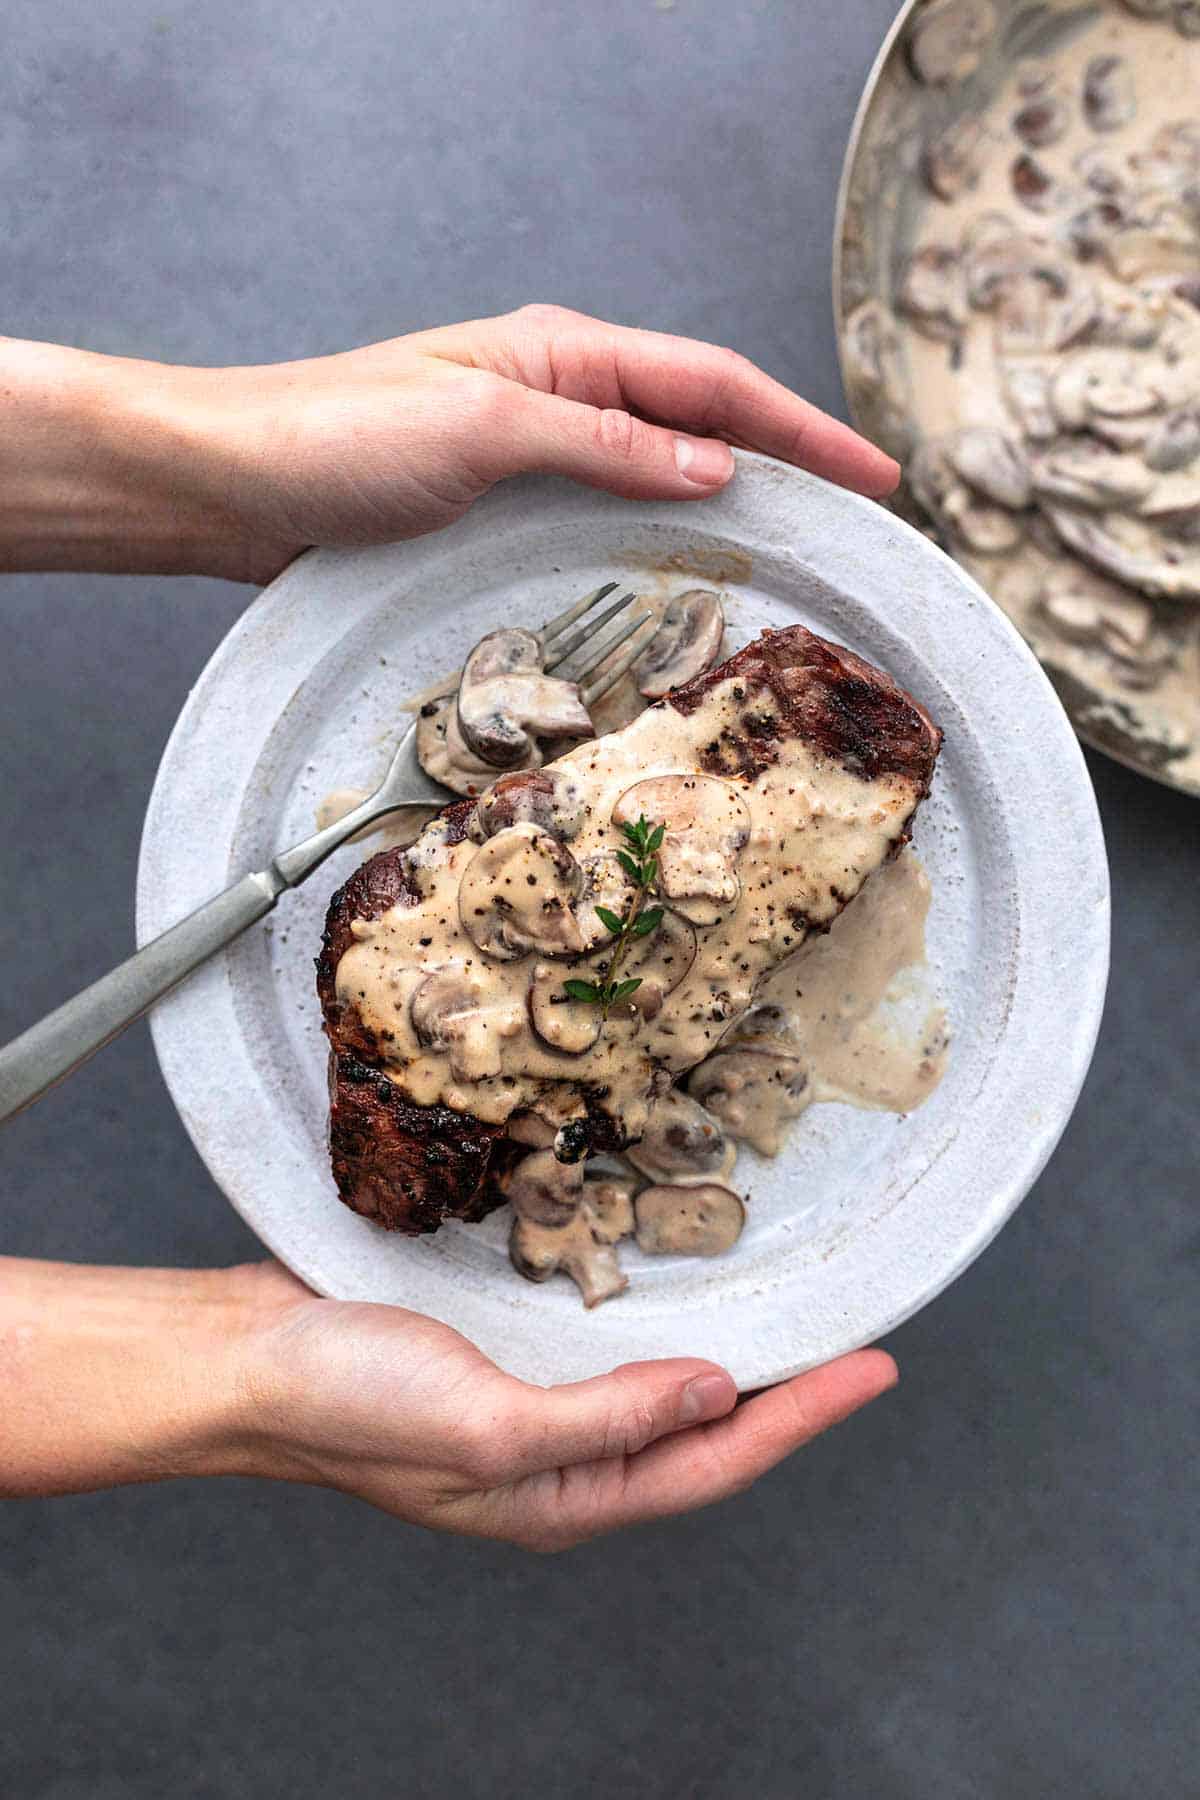 hands holding white plate with cooked steak topped with a brown mushroom sauce